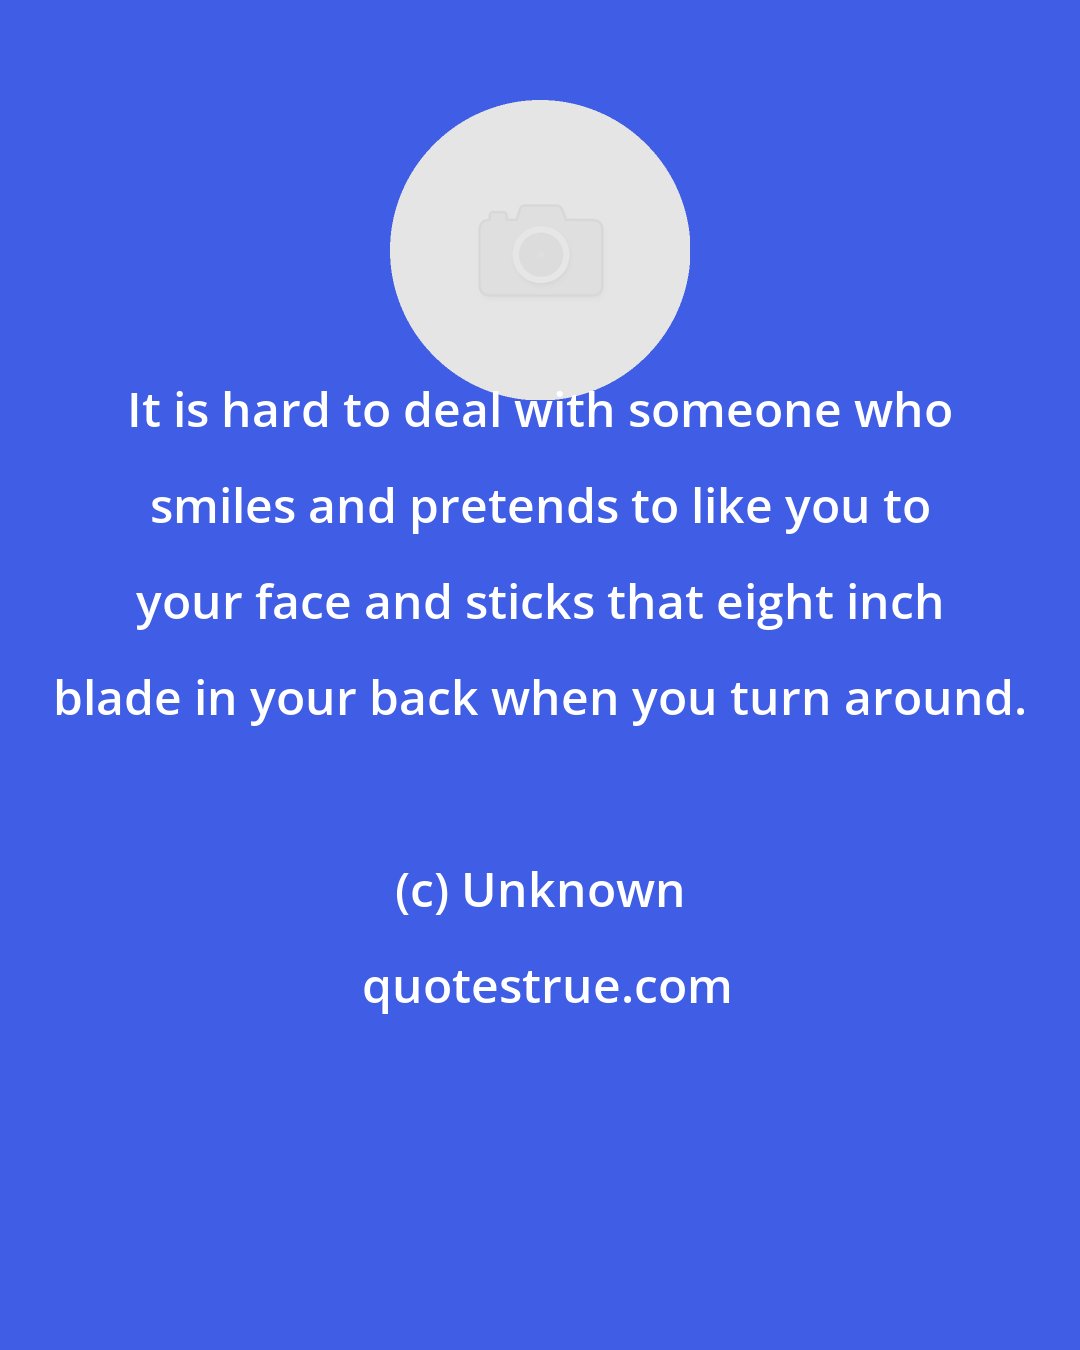 Unknown: It is hard to deal with someone who smiles and pretends to like you to your face and sticks that eight inch blade in your back when you turn around.